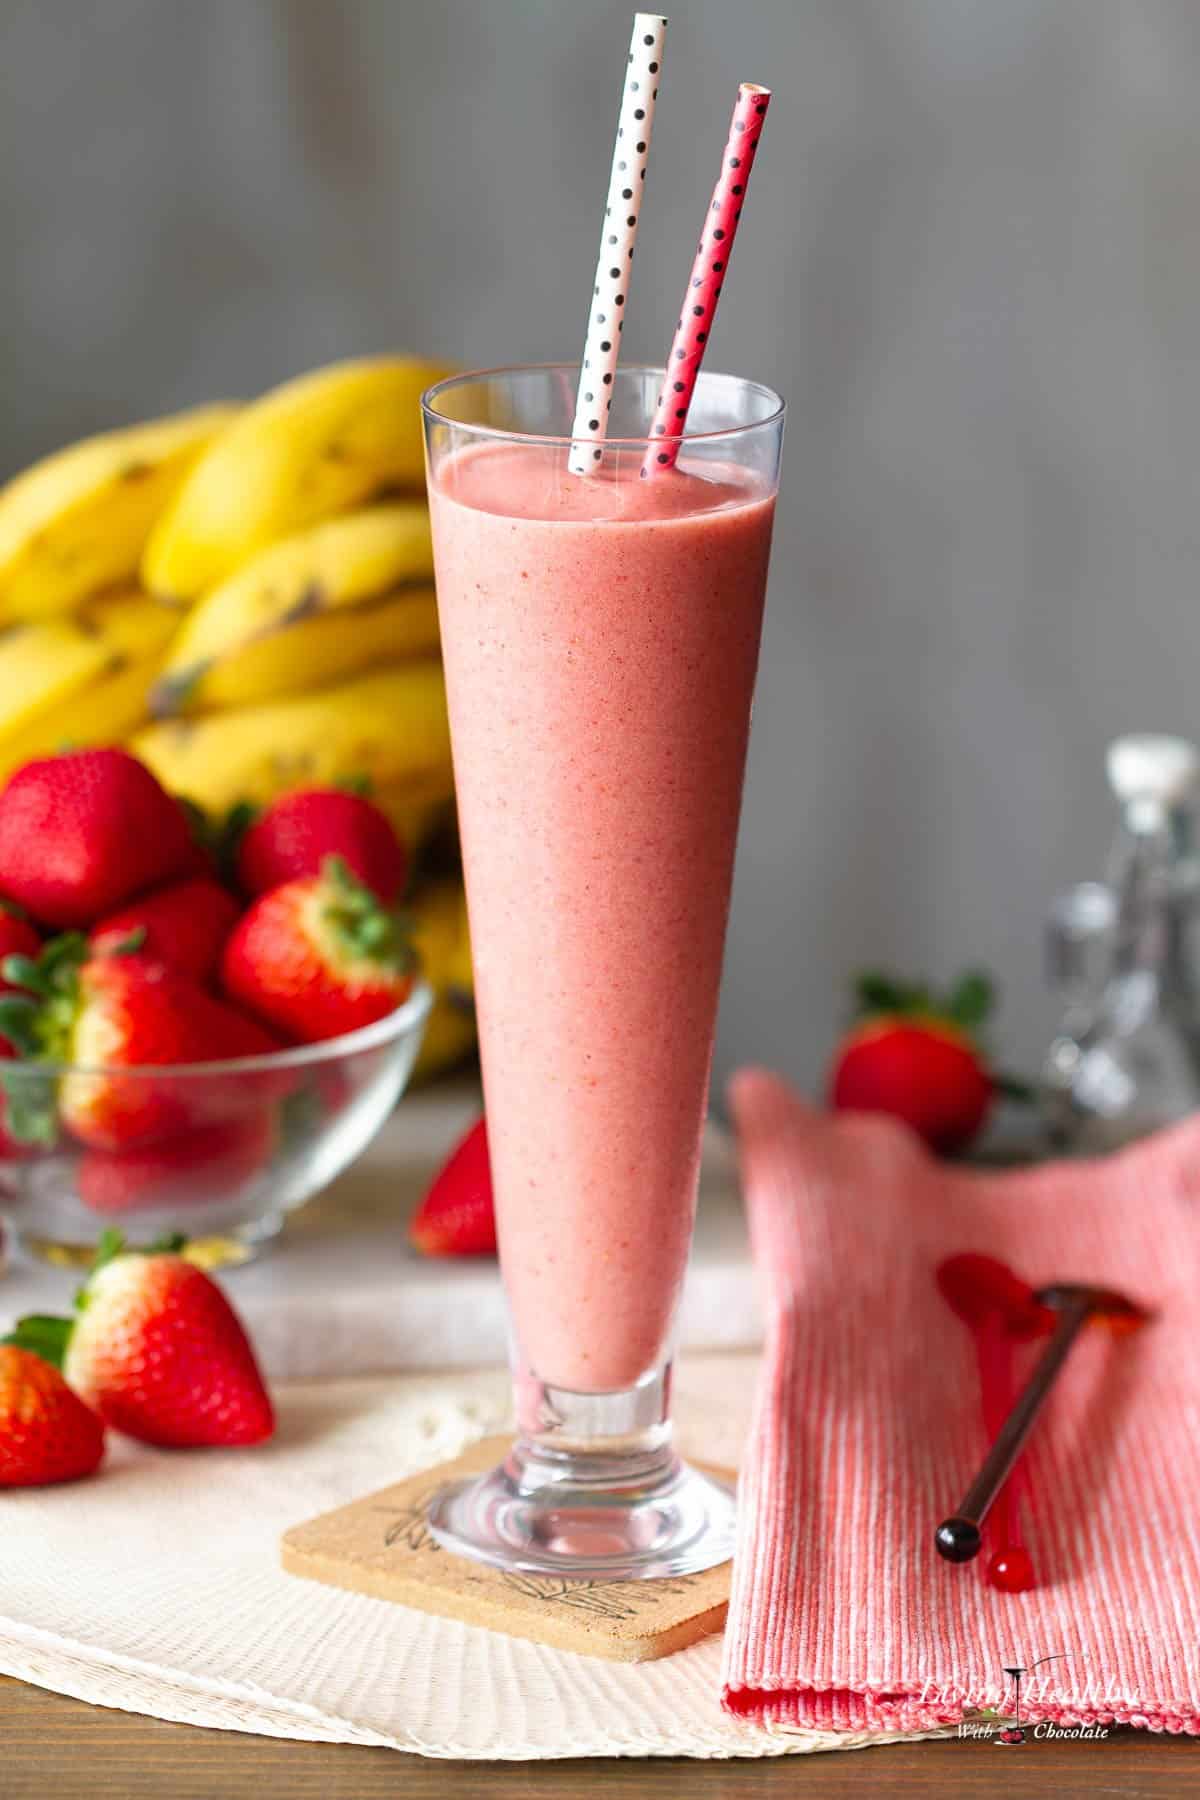 tall glass on a coaster filled with strawberry milkshake with two straws and some fresh fruits on the background.